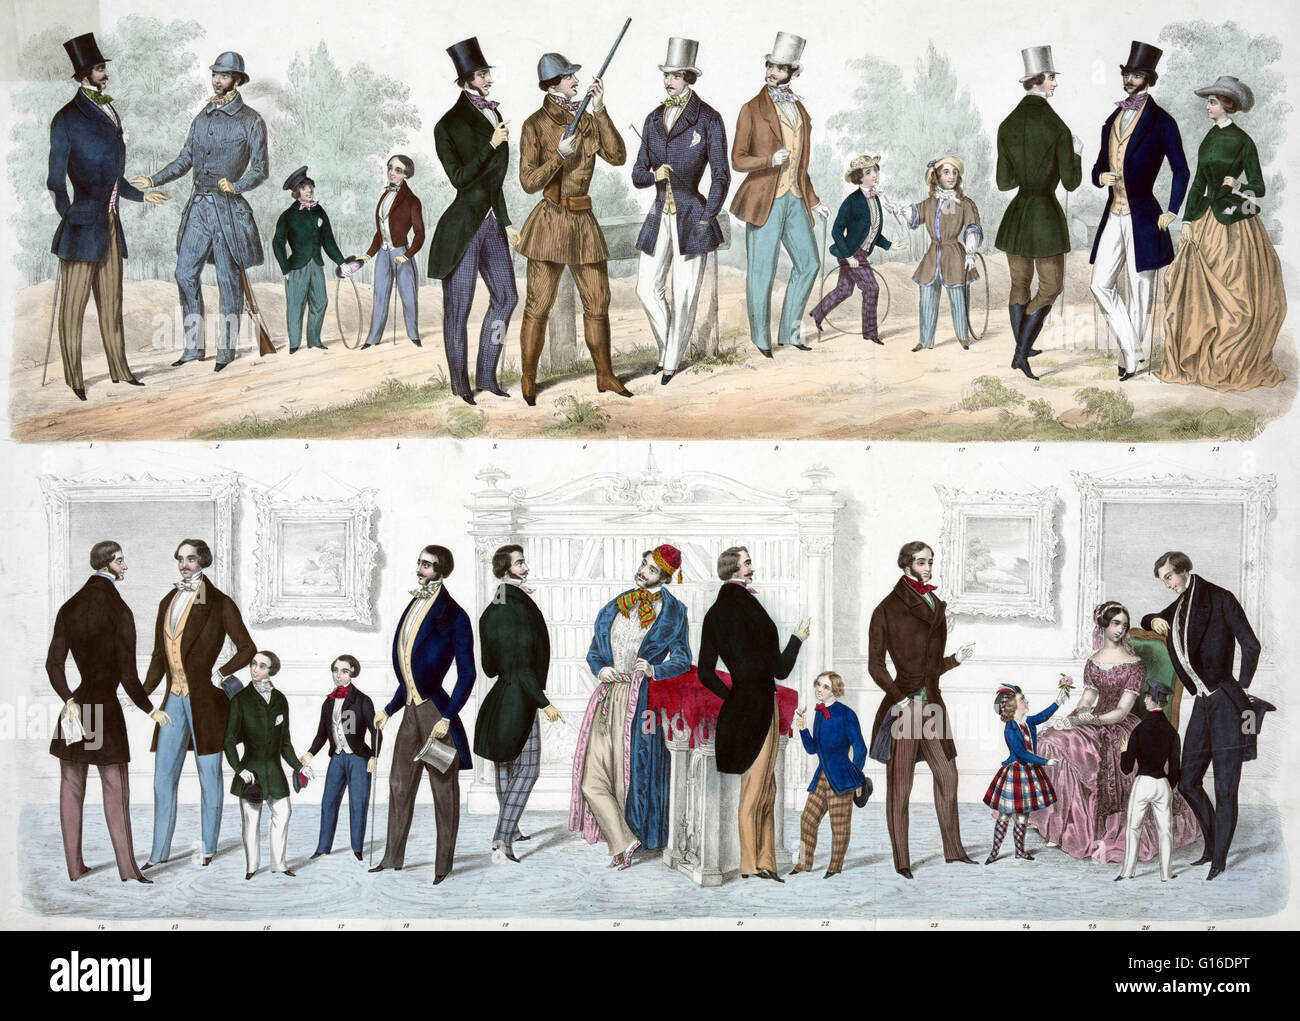 Print shows in two horizontal panels, at top, eight men, a woman, and four children standing outdoors along a dirt roadway, two of the men are dressed for hunting and carry rifles, and at bottom, eight men and five children are standing, and one woman is Stock Photo